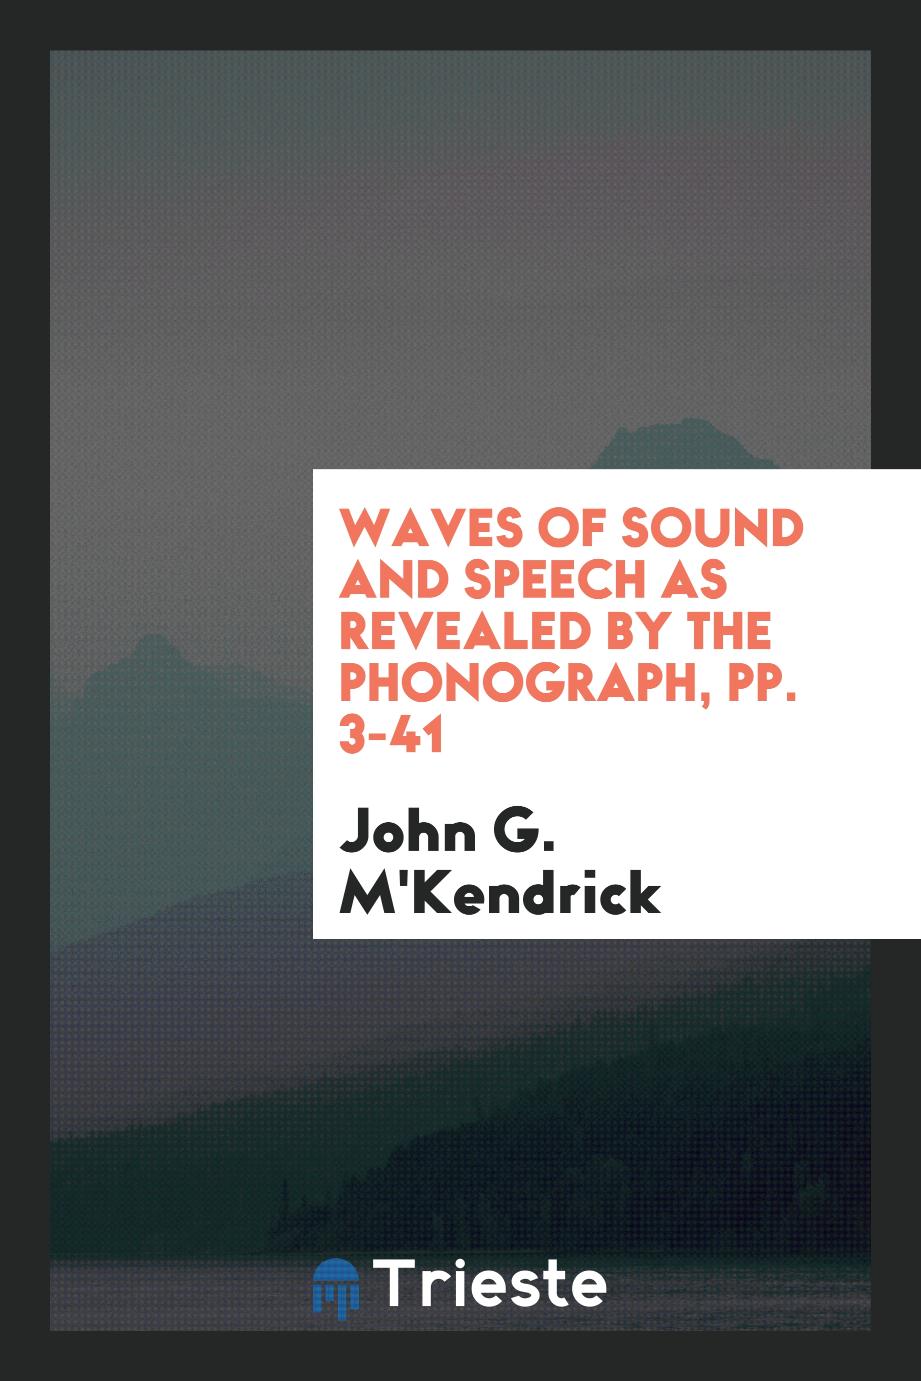 Waves of Sound and Speech as Revealed by the Phonograph, pp. 3-41